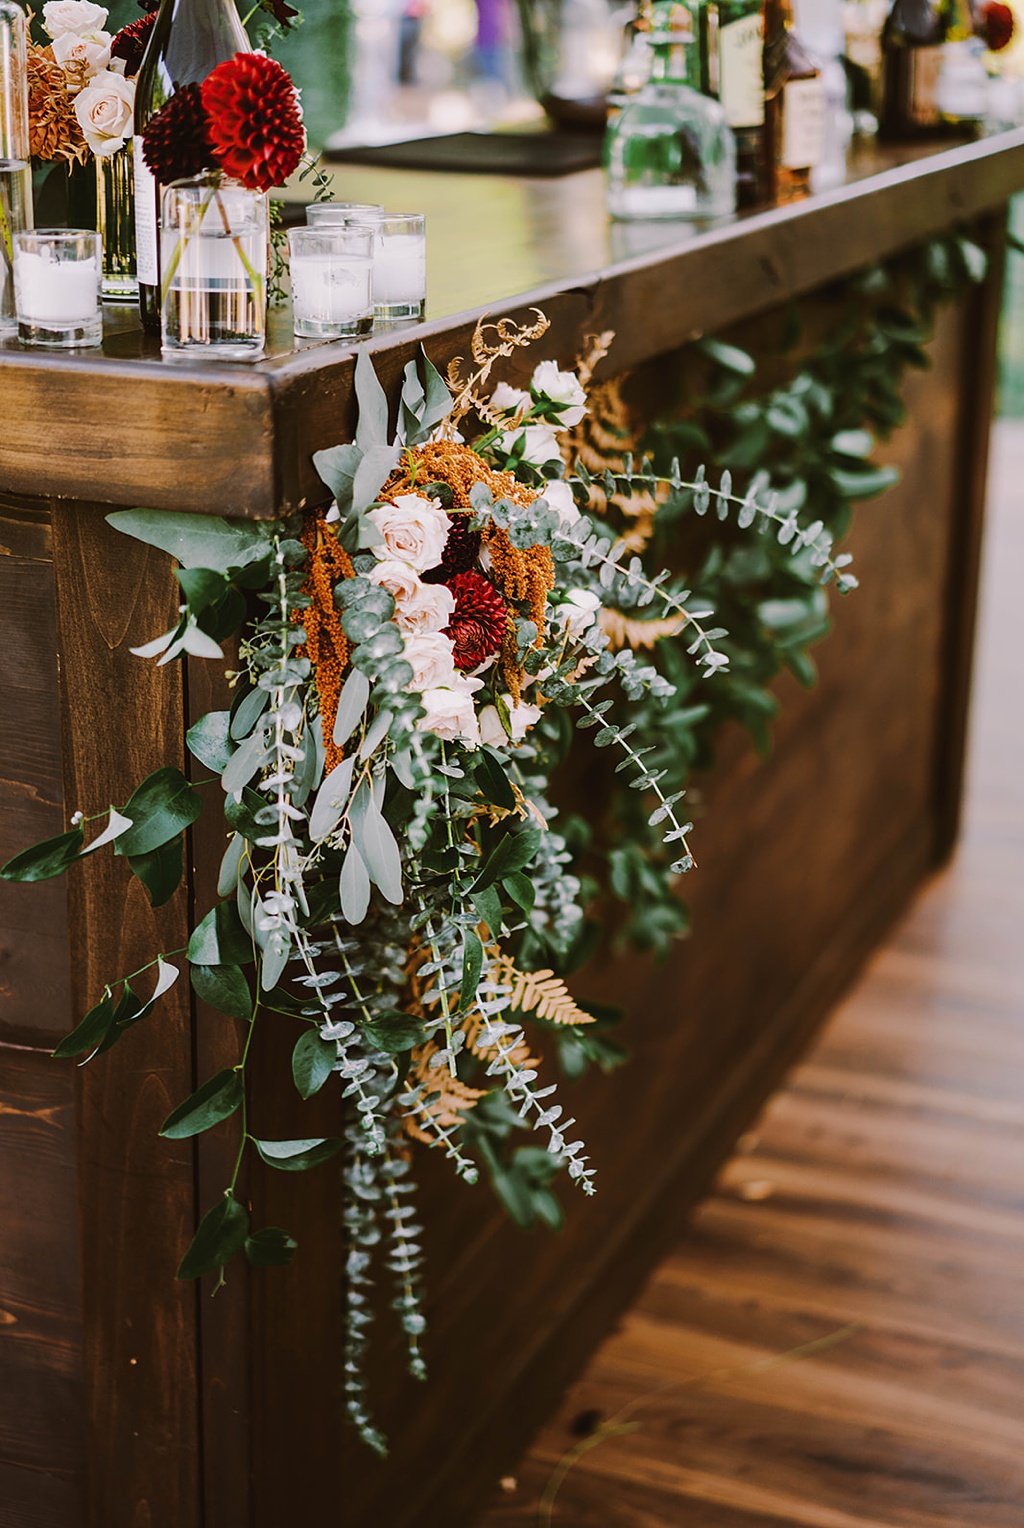 A bar floral installation full of textured greenery and blooms at this late summer wedding